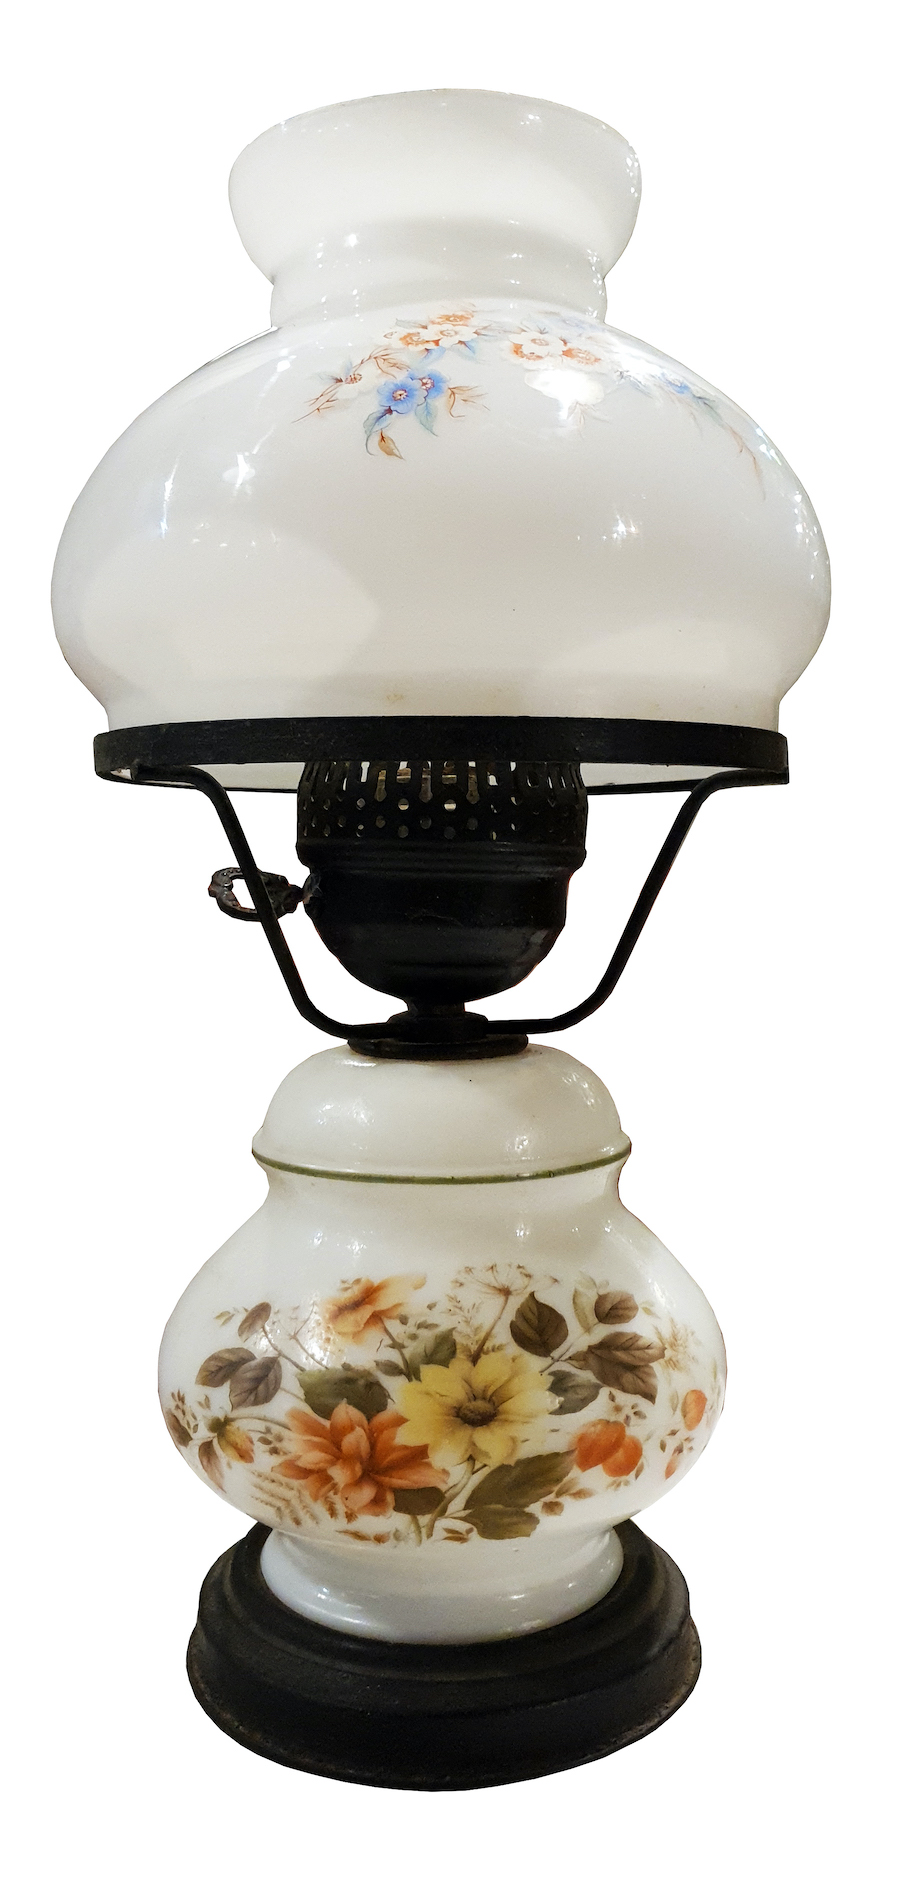 An early 20th century European table lamp with white glass shade